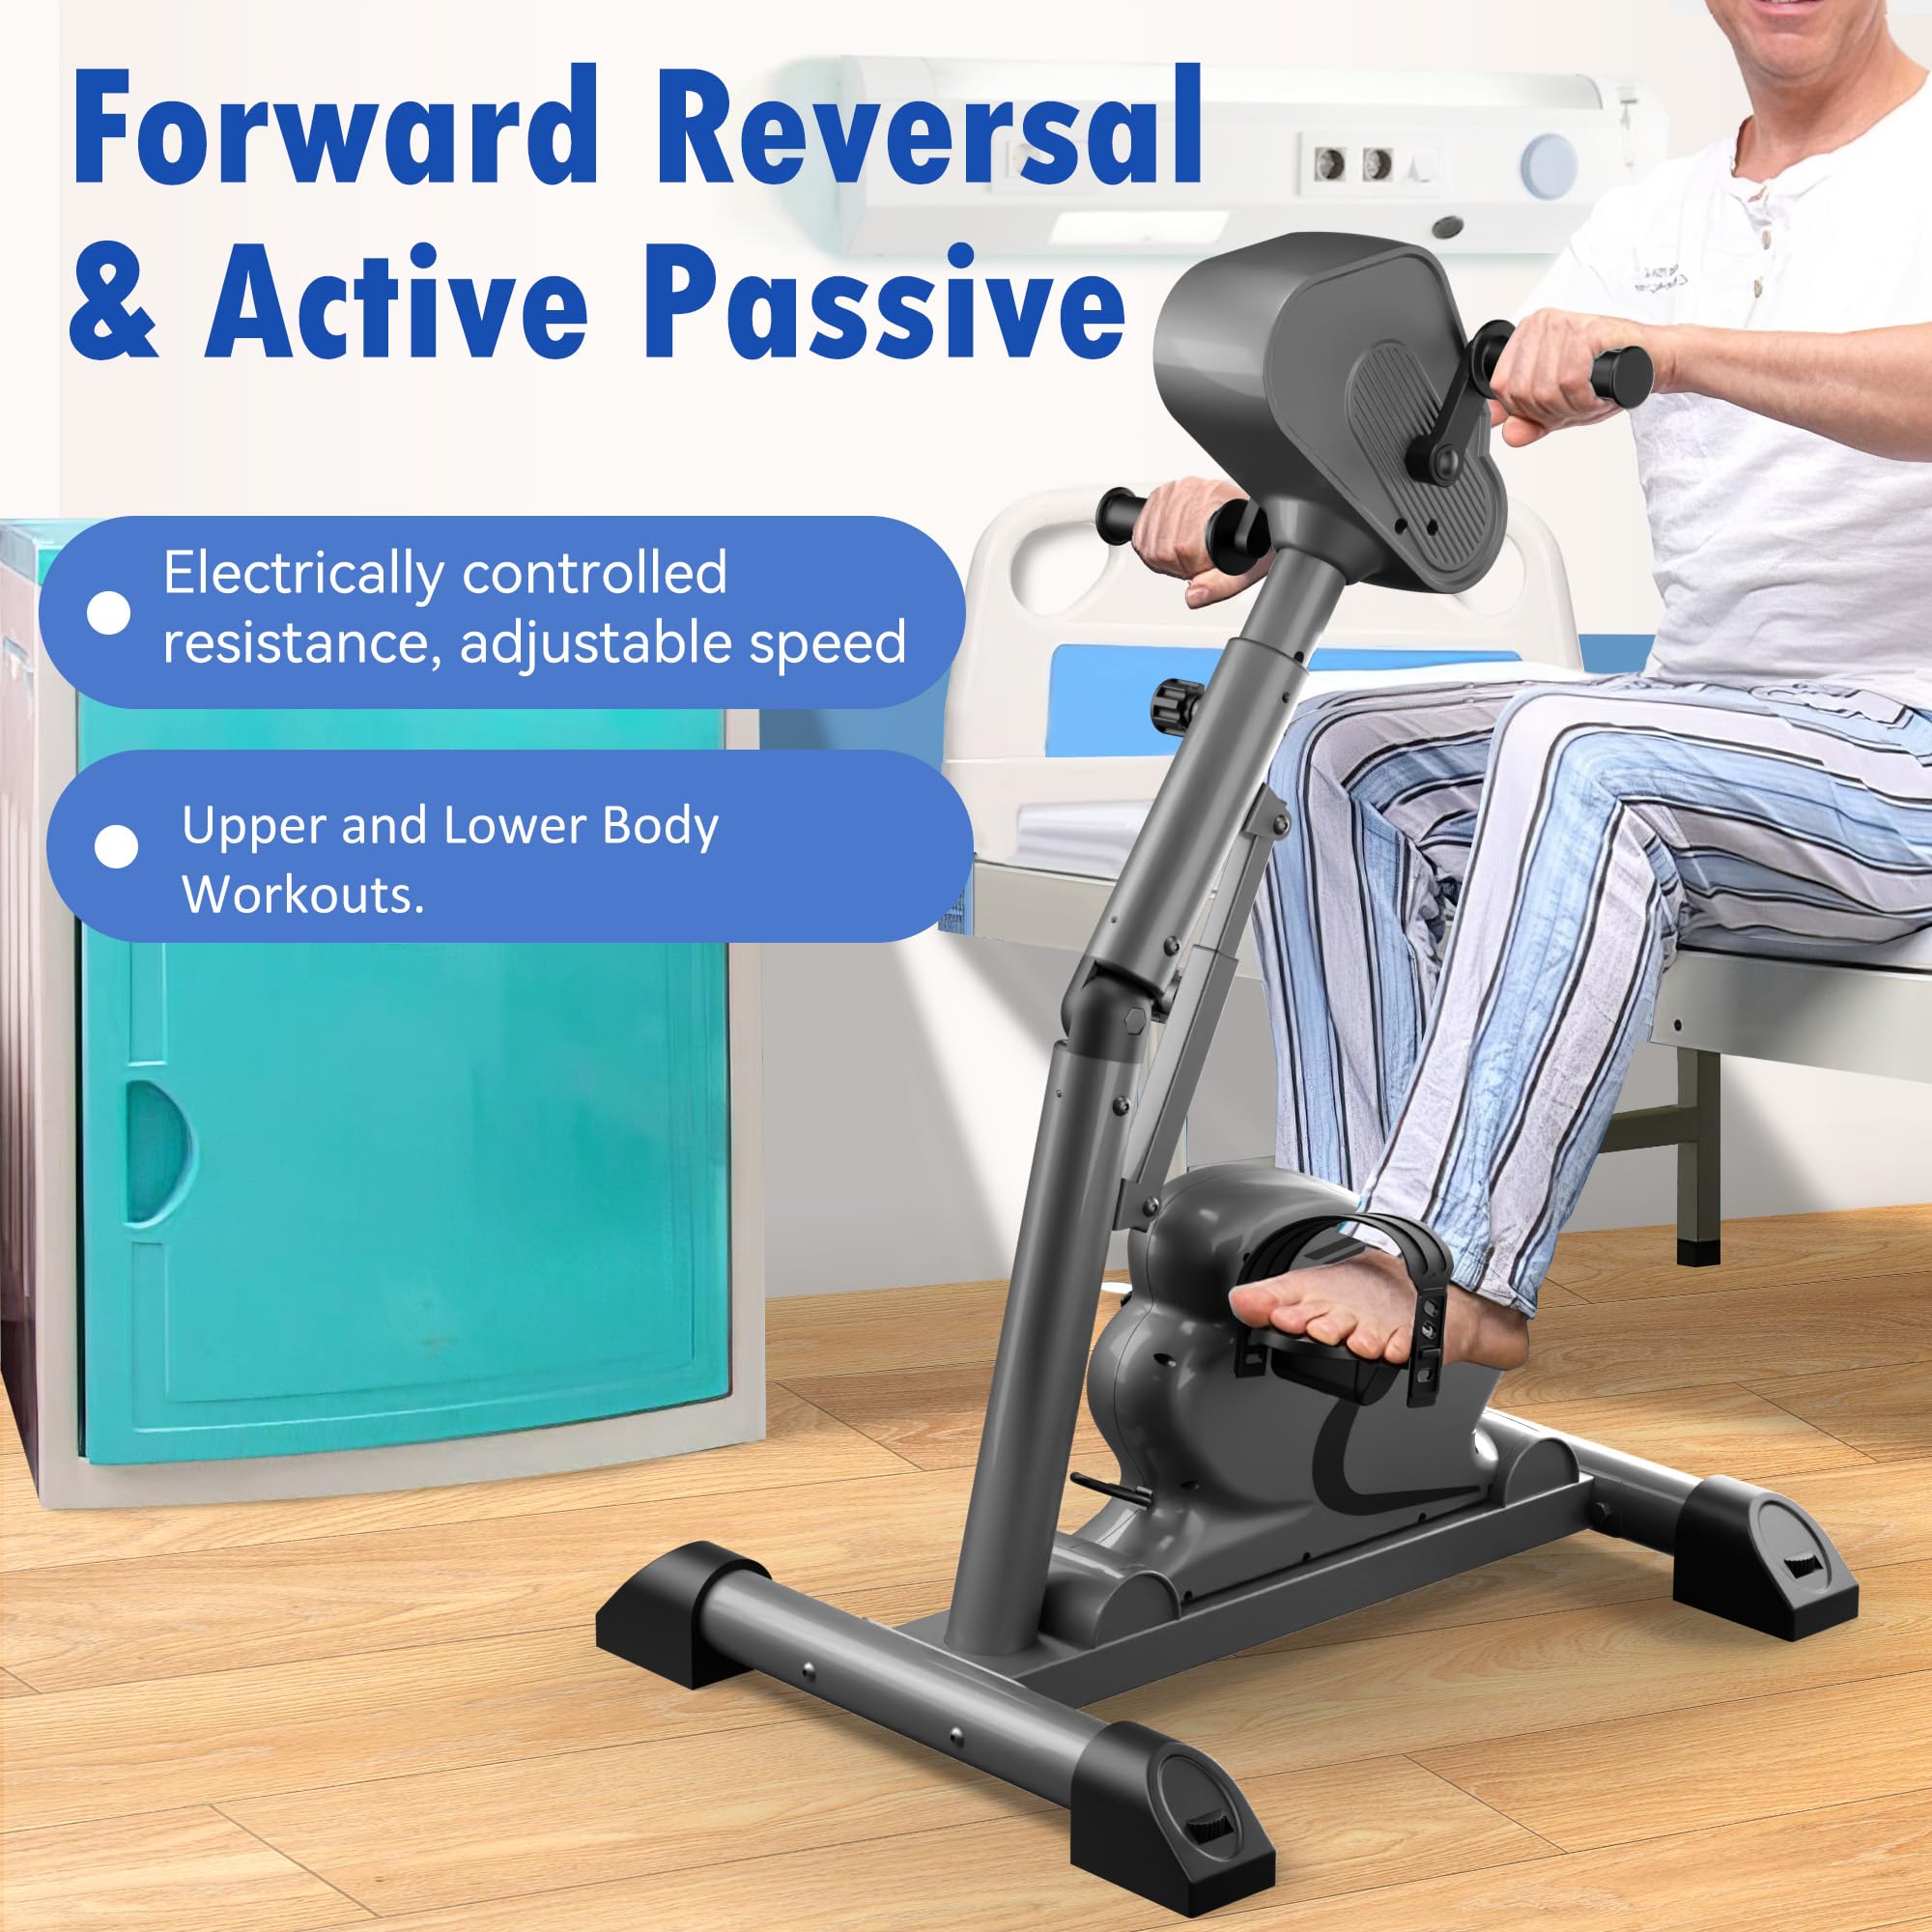 HNLIY Motorized Pedal Exerciser Leg Arm Workout Knee Physical Therapy Assisted Rehabilitation Electric Exercise Bike Home Recover Fitness Equipment Suitable for Elderly